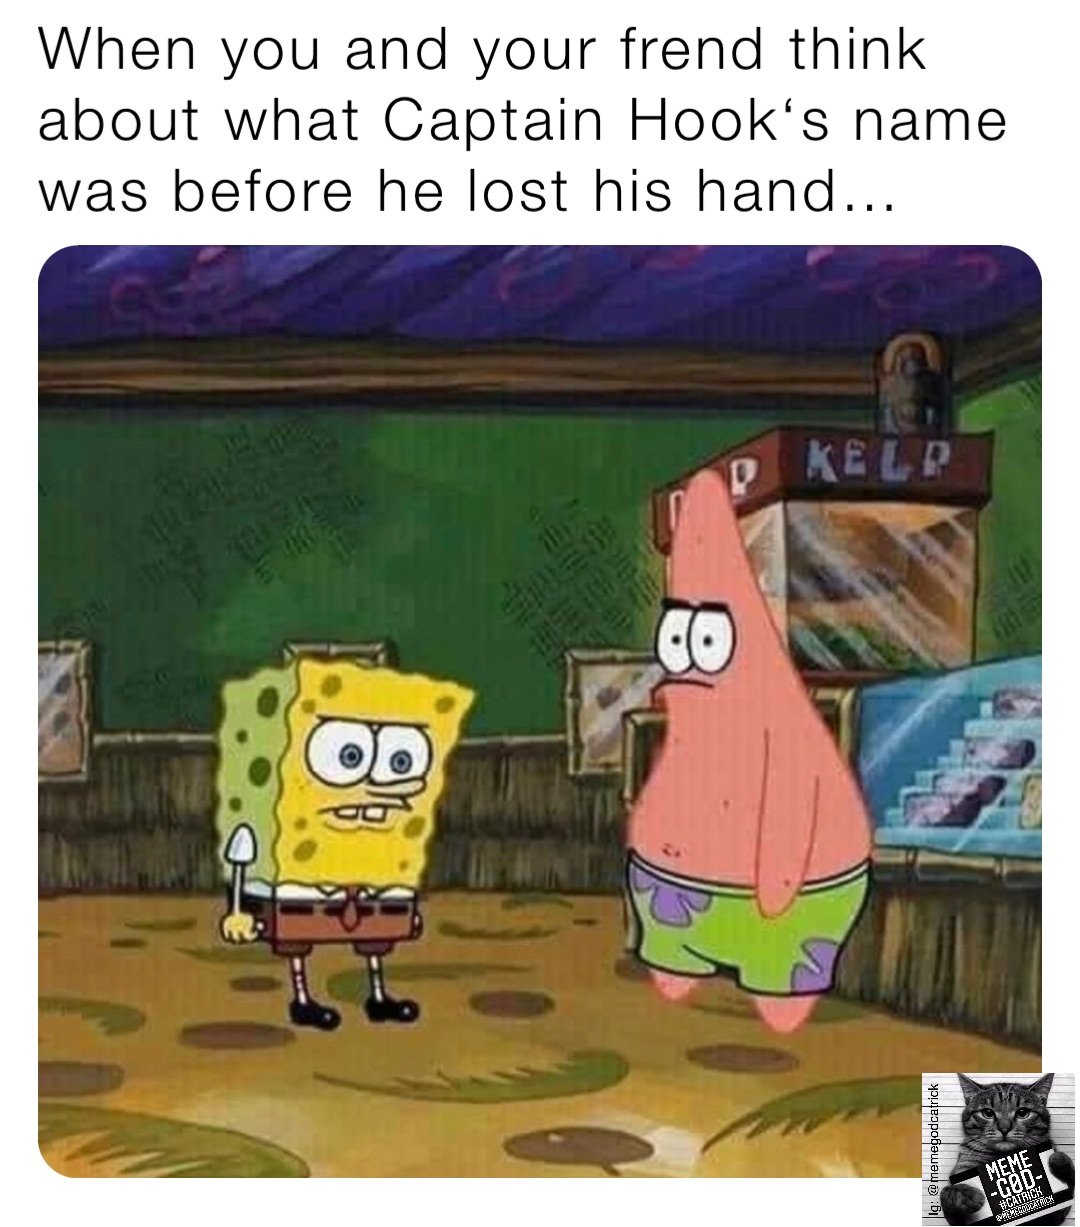 When you and your frend think about what Captain Hook‘s name was before he lost his hand…